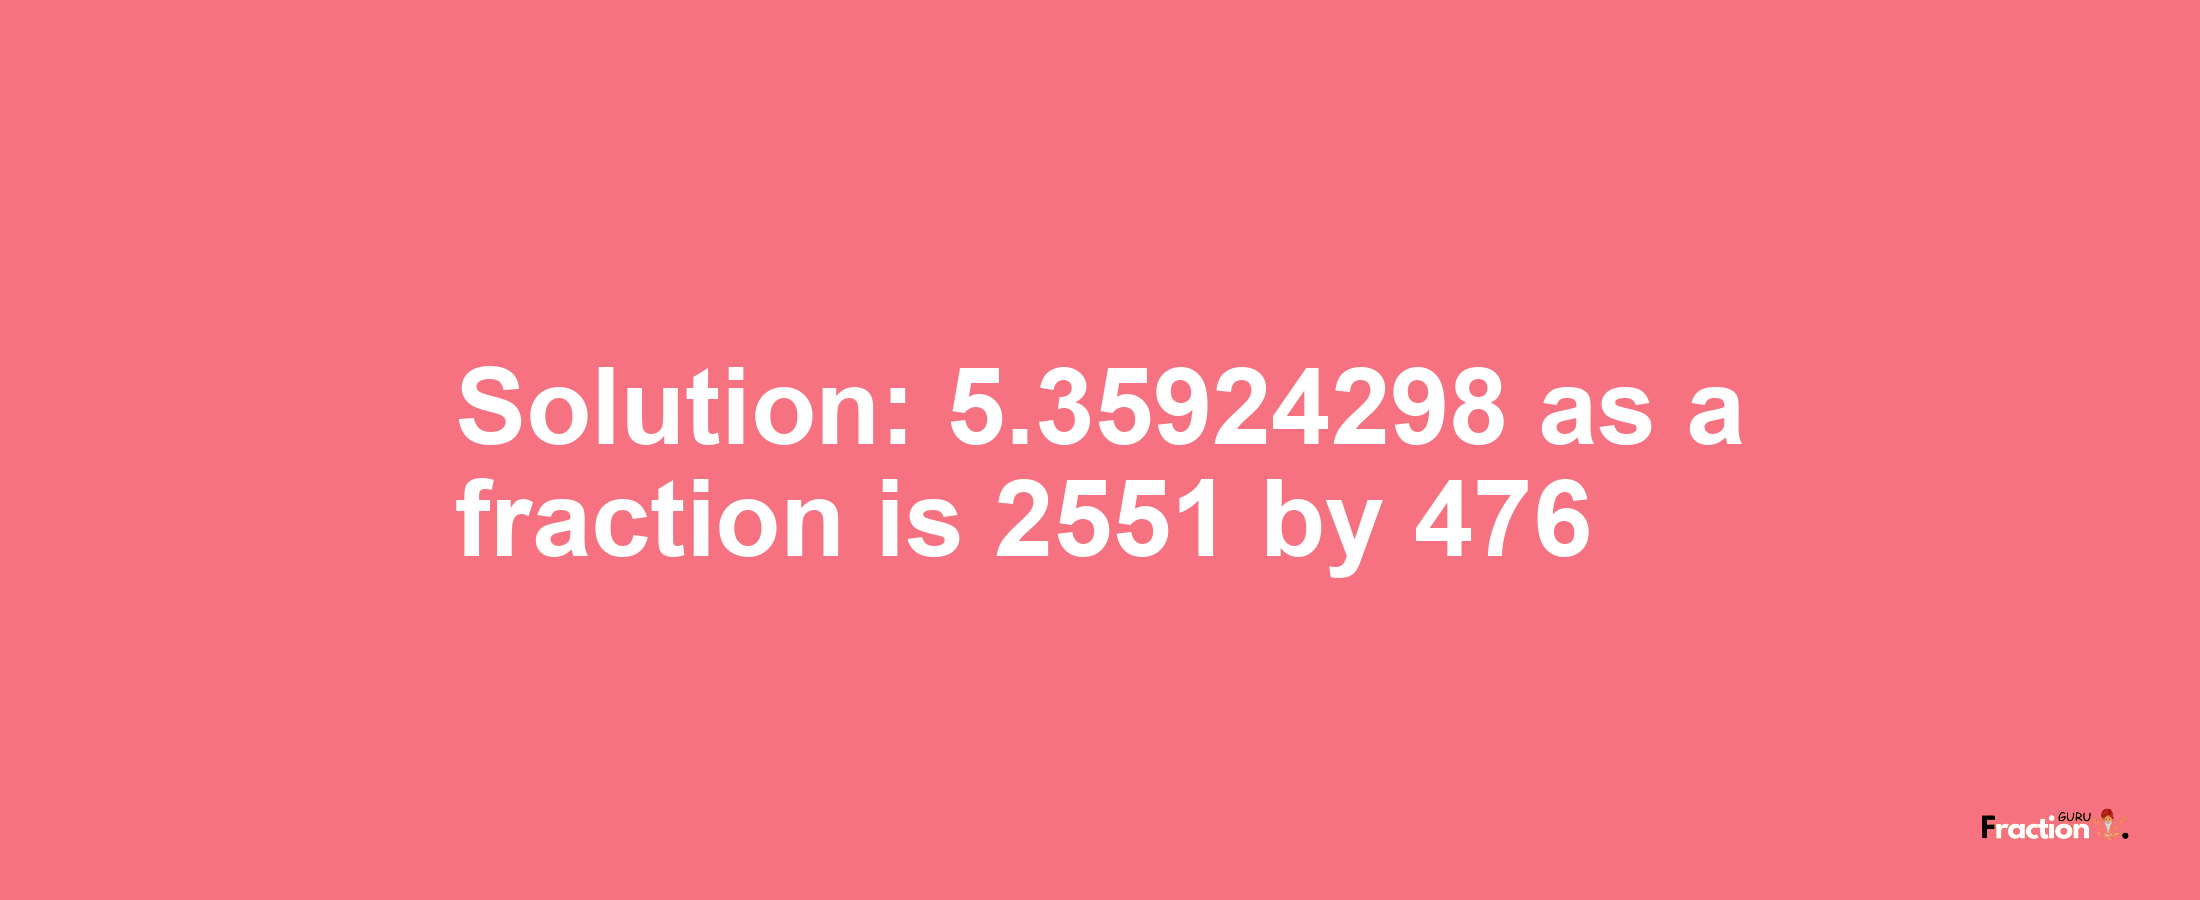 Solution:5.35924298 as a fraction is 2551/476